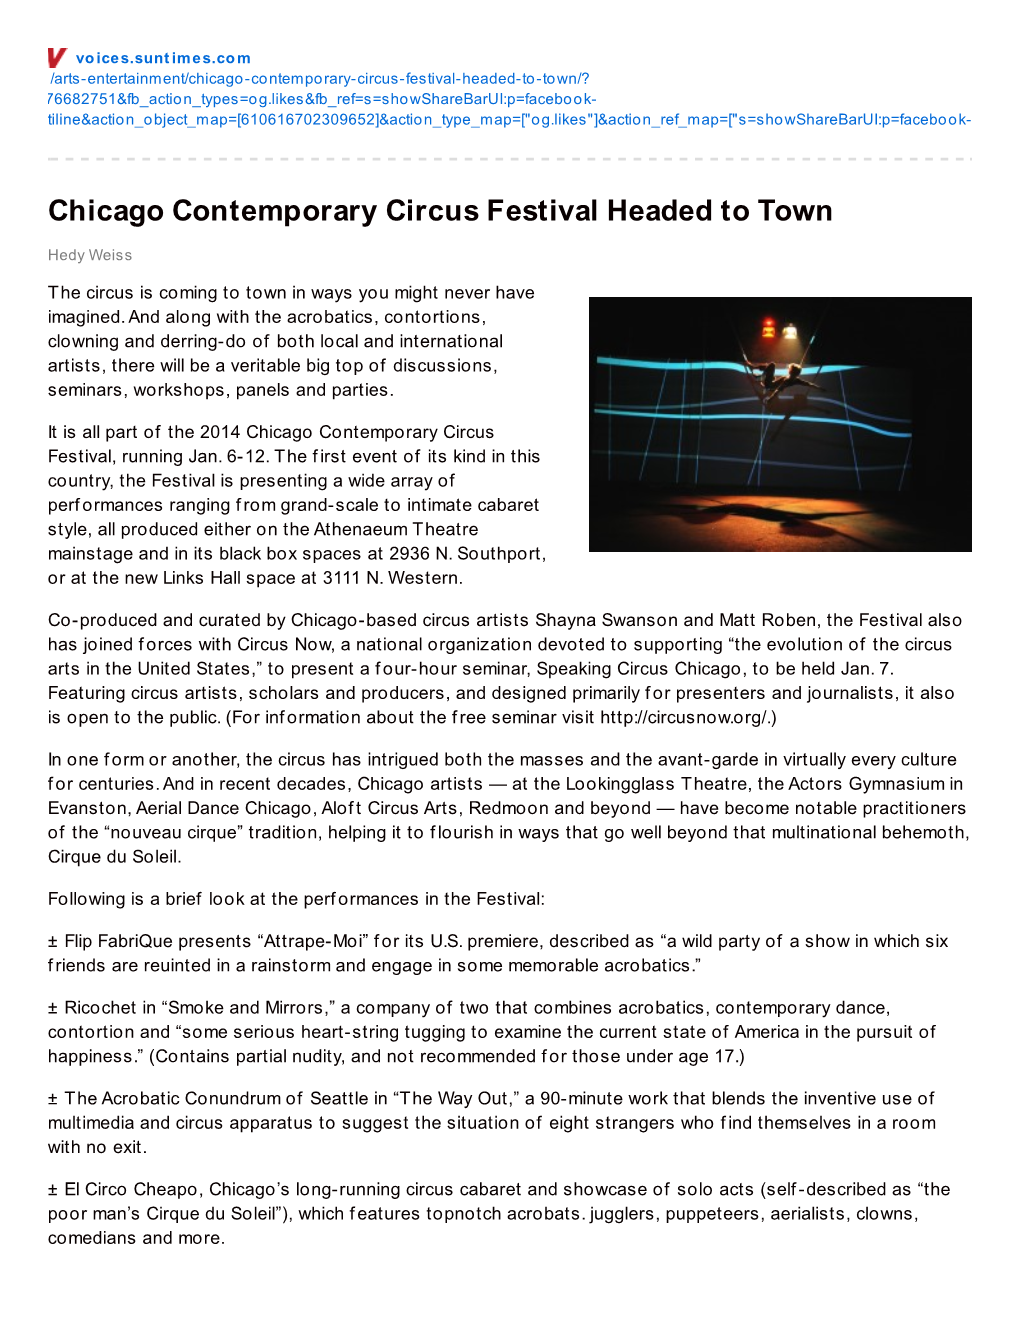 Chicago Contemporary Circus Festival Headed to Town